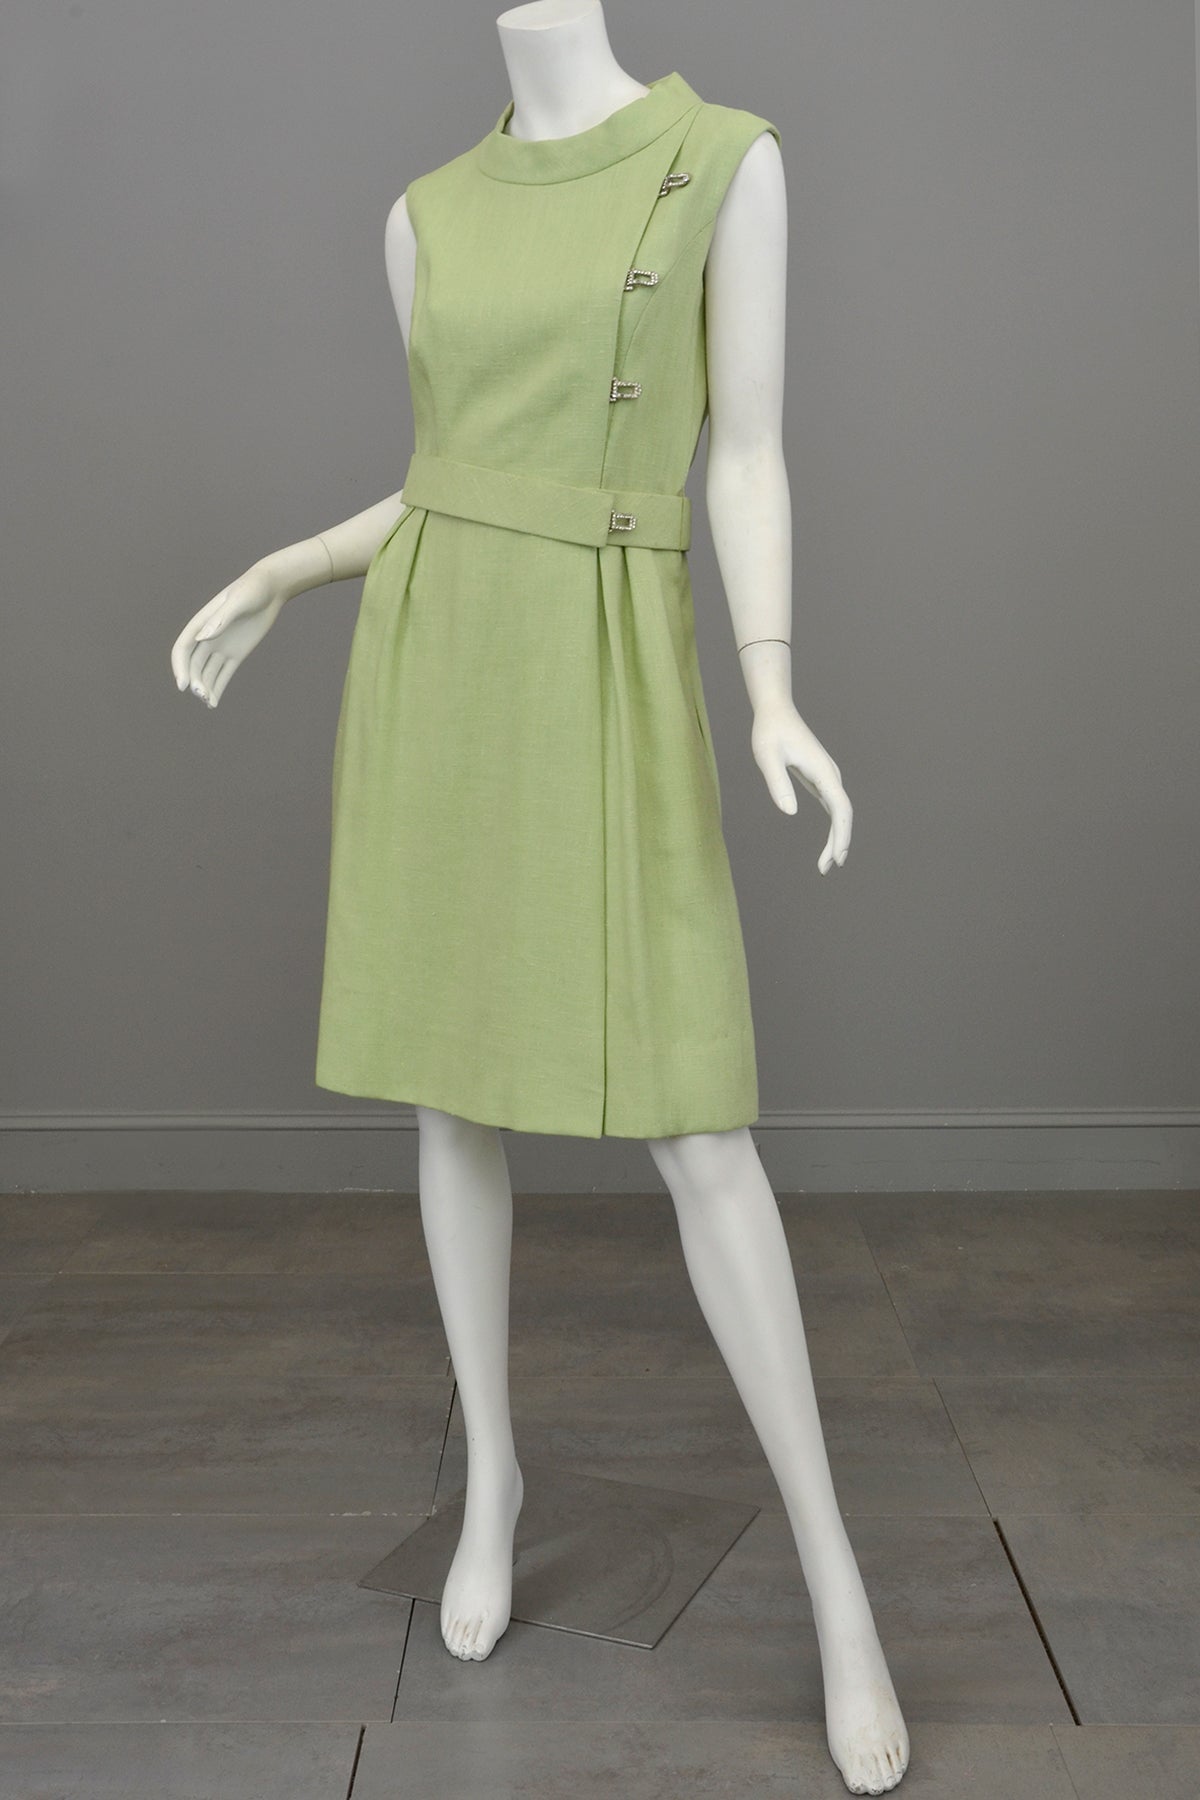 1960s Citrus Lime Green Crystal Buttons Retro Dress by Adele Simpson